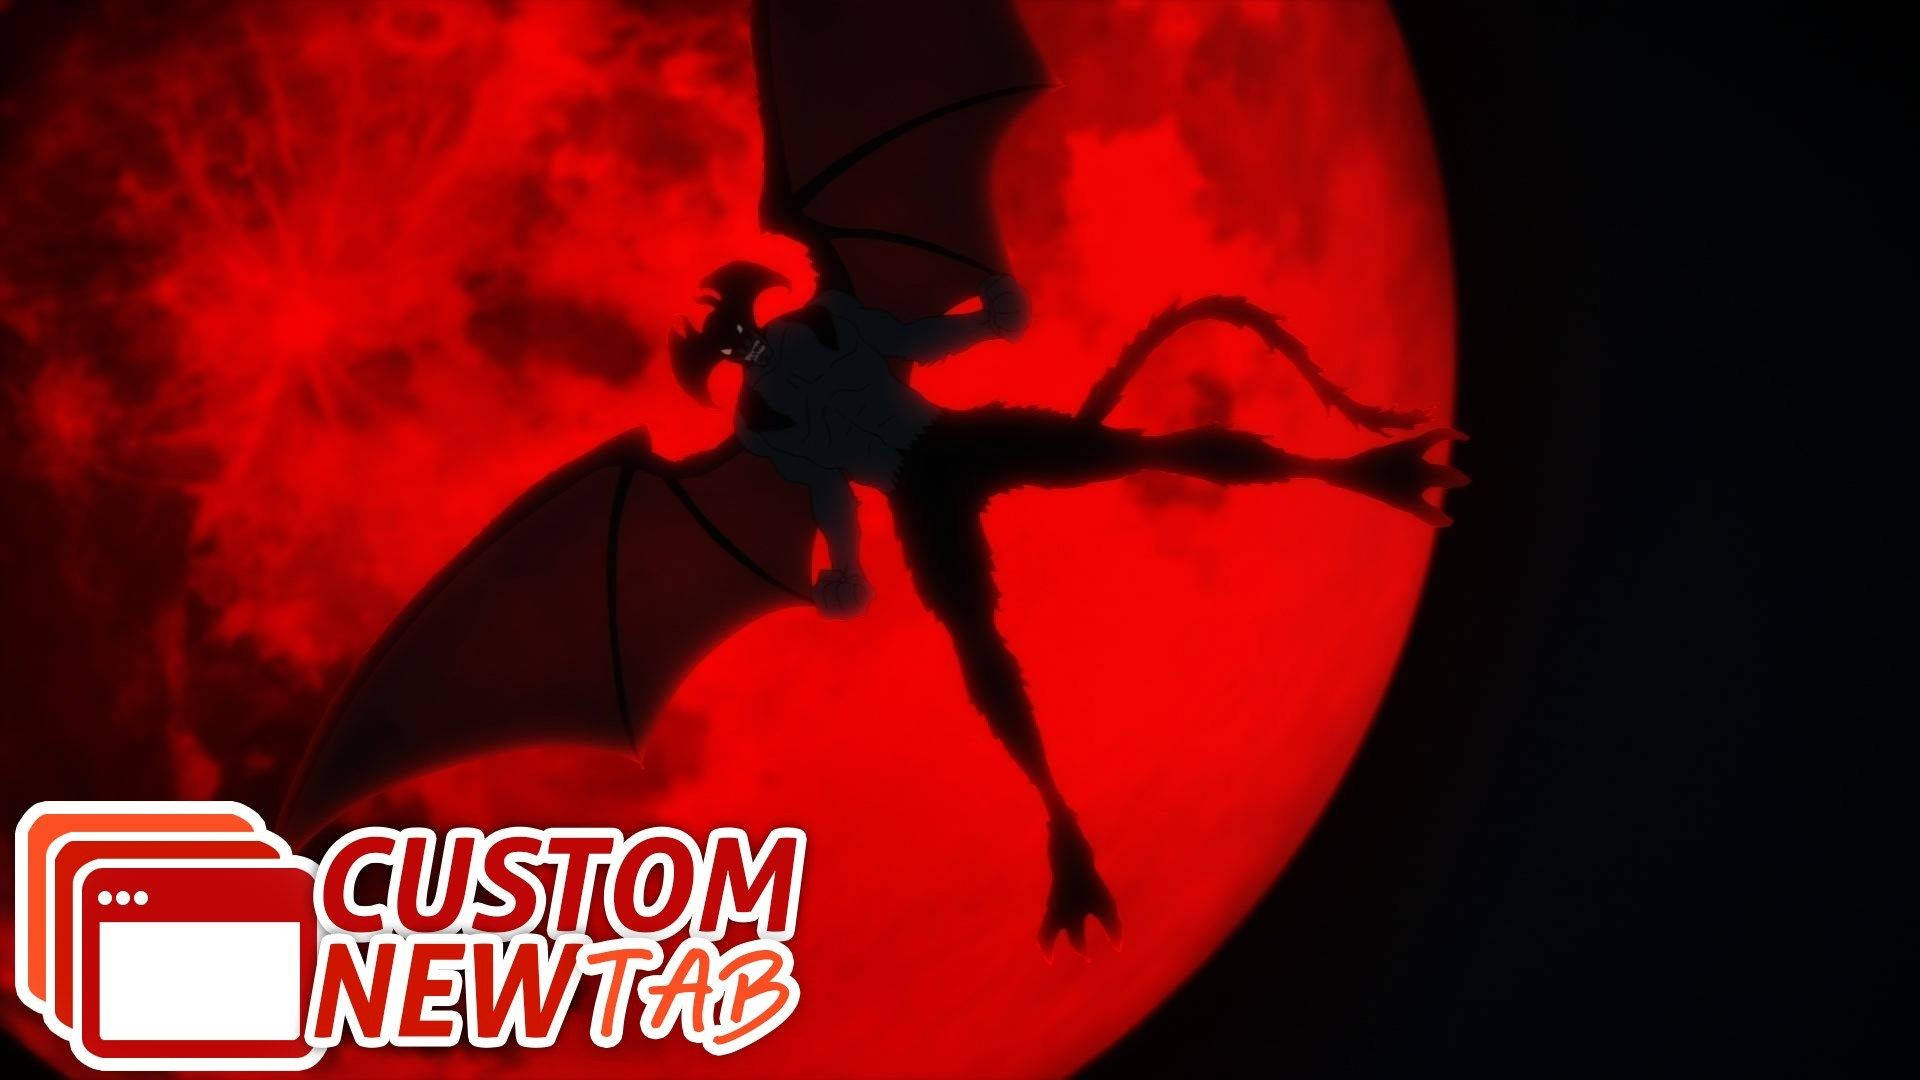 Devilman Crybaby 1920X1080 Wallpaper and Background Image